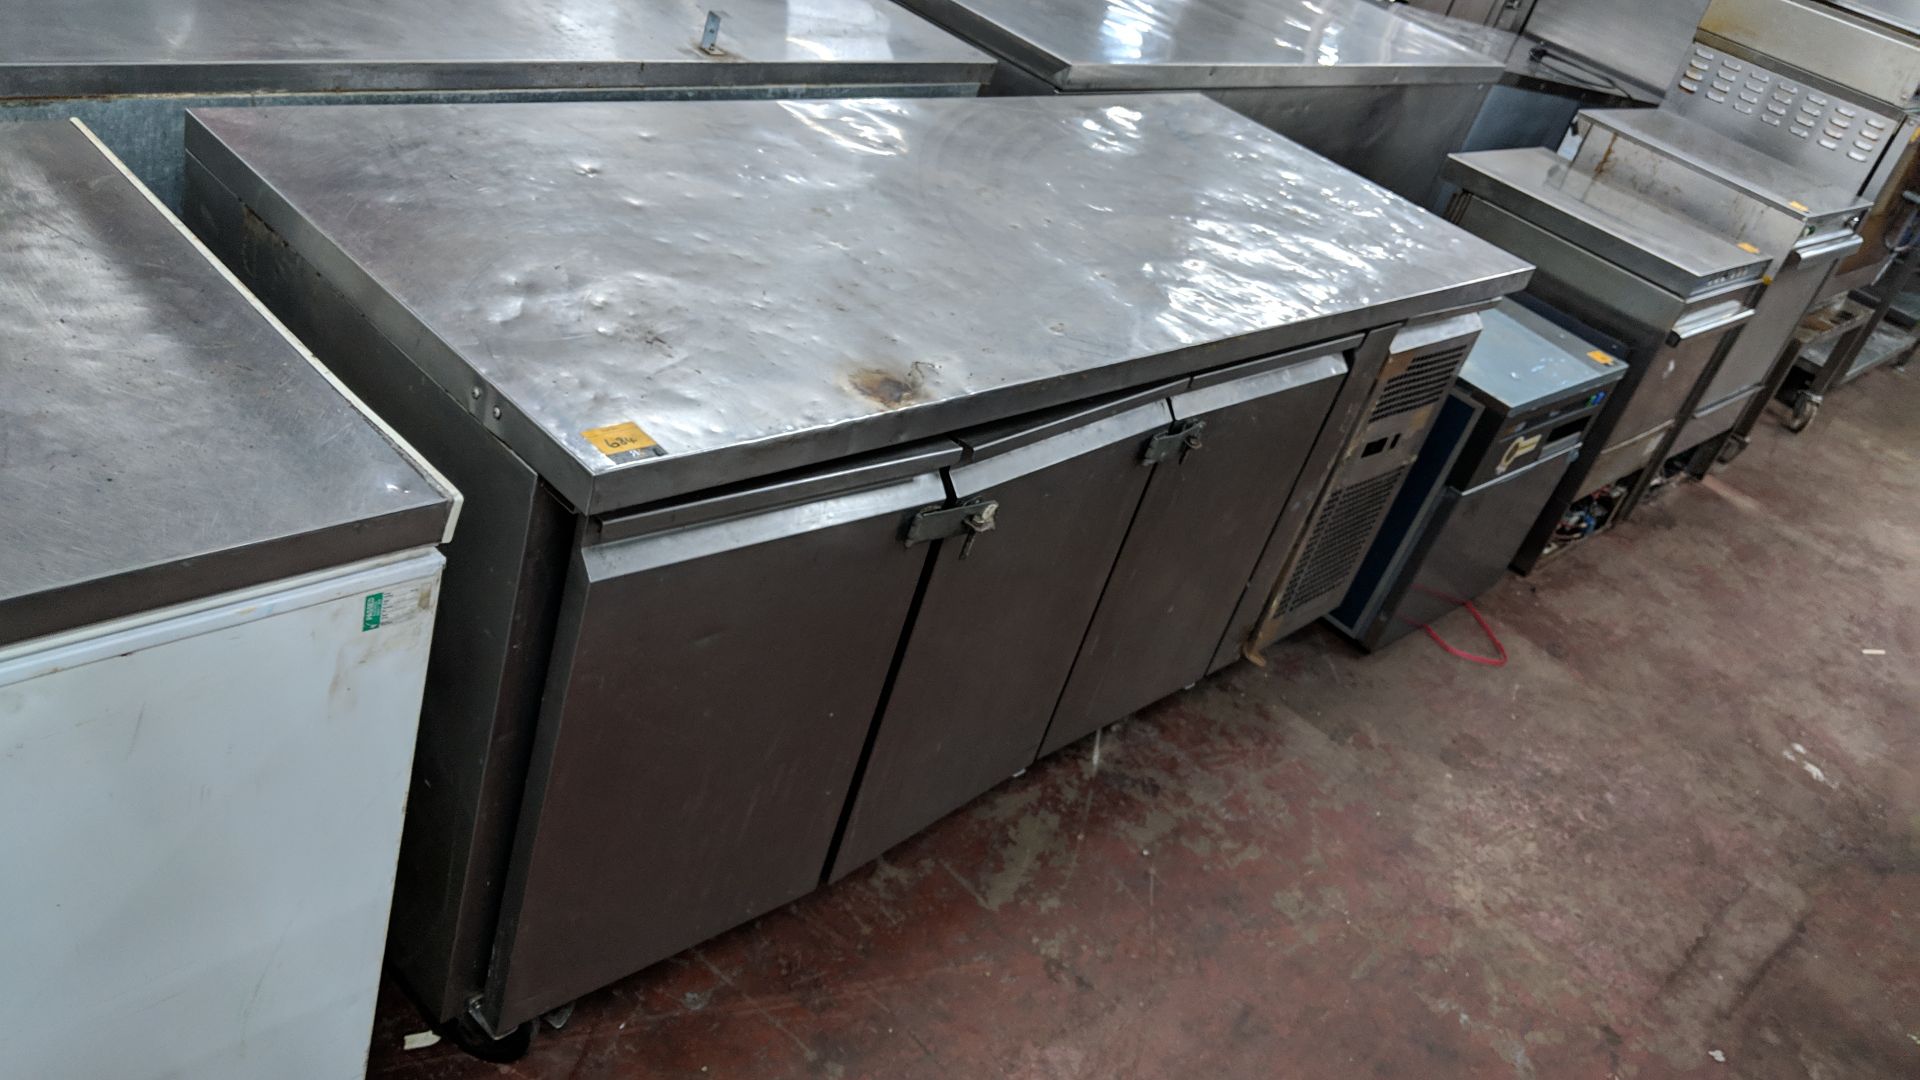 Stainless steel refrigerated prep cabinet IMPORTANT: Please remember goods successfully bid upon - Image 3 of 4